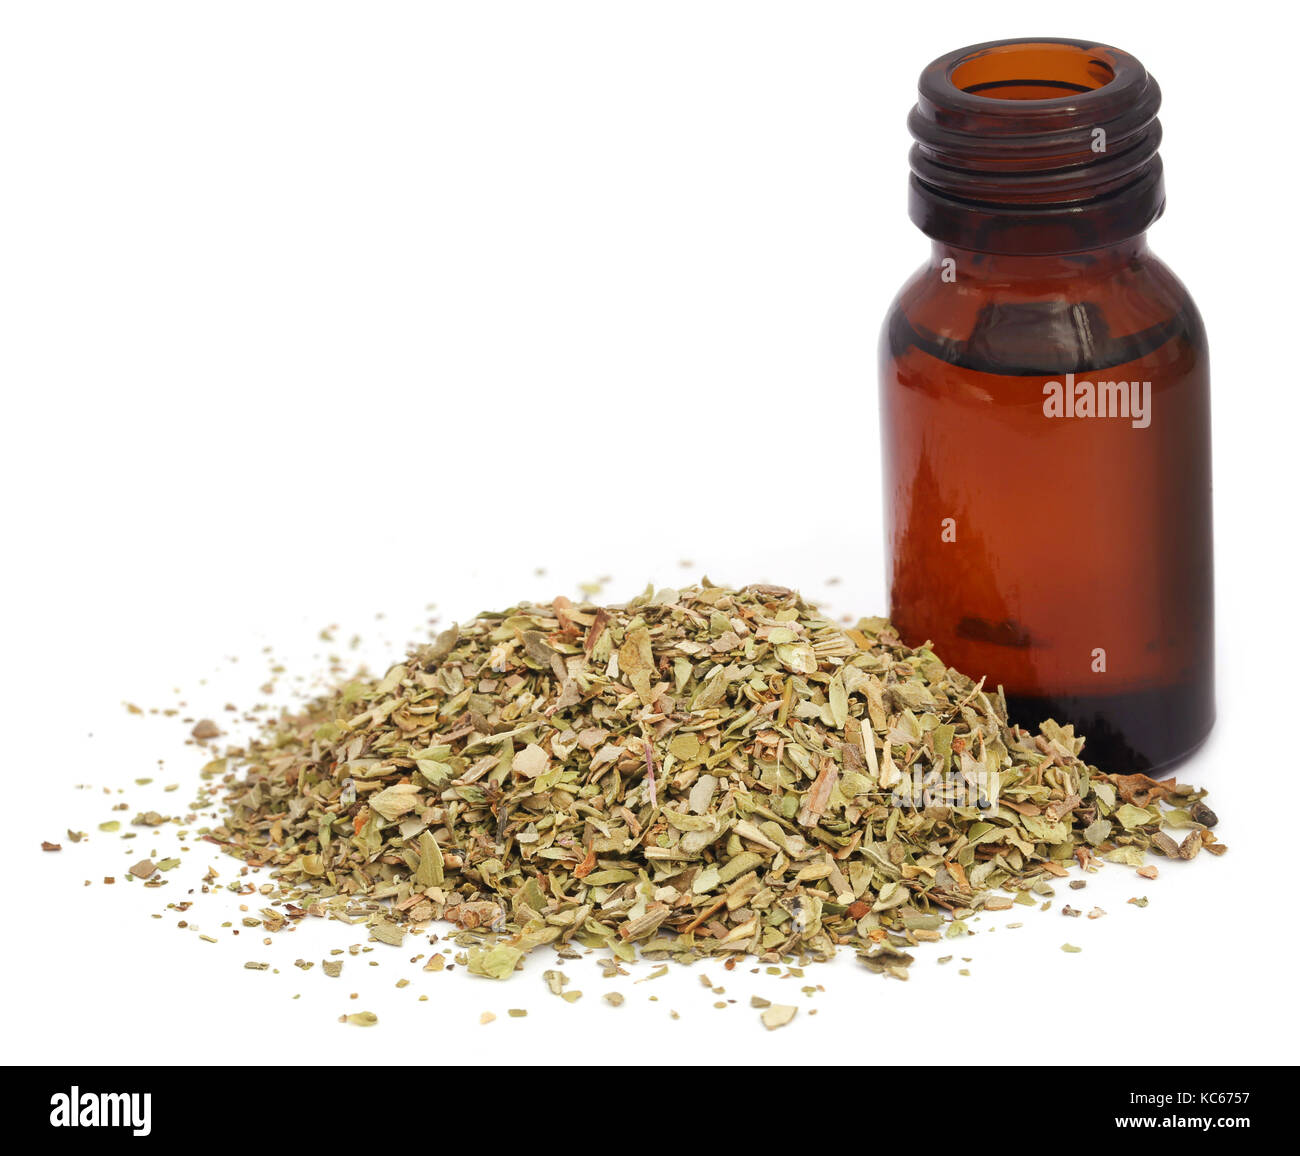 Dry oregano and essential oil in an amber bottle Stock Photo